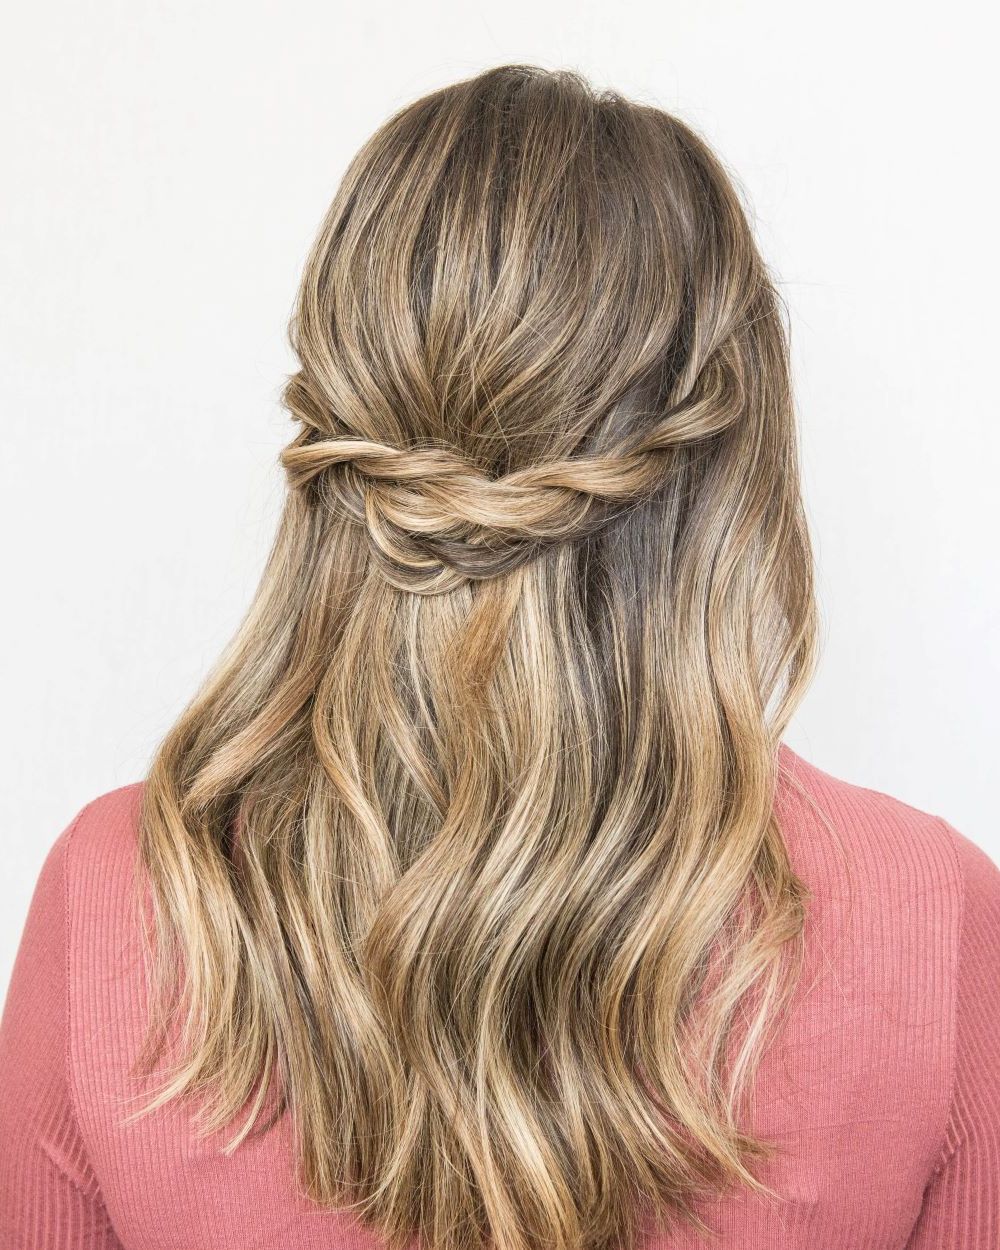 Famous Braided Half Up Hairstyles For A Cute Look With Regard To Half Up Half Down Hairstyle With Braid Tutorial – Lulus Fashion Blog (View 4 of 20)